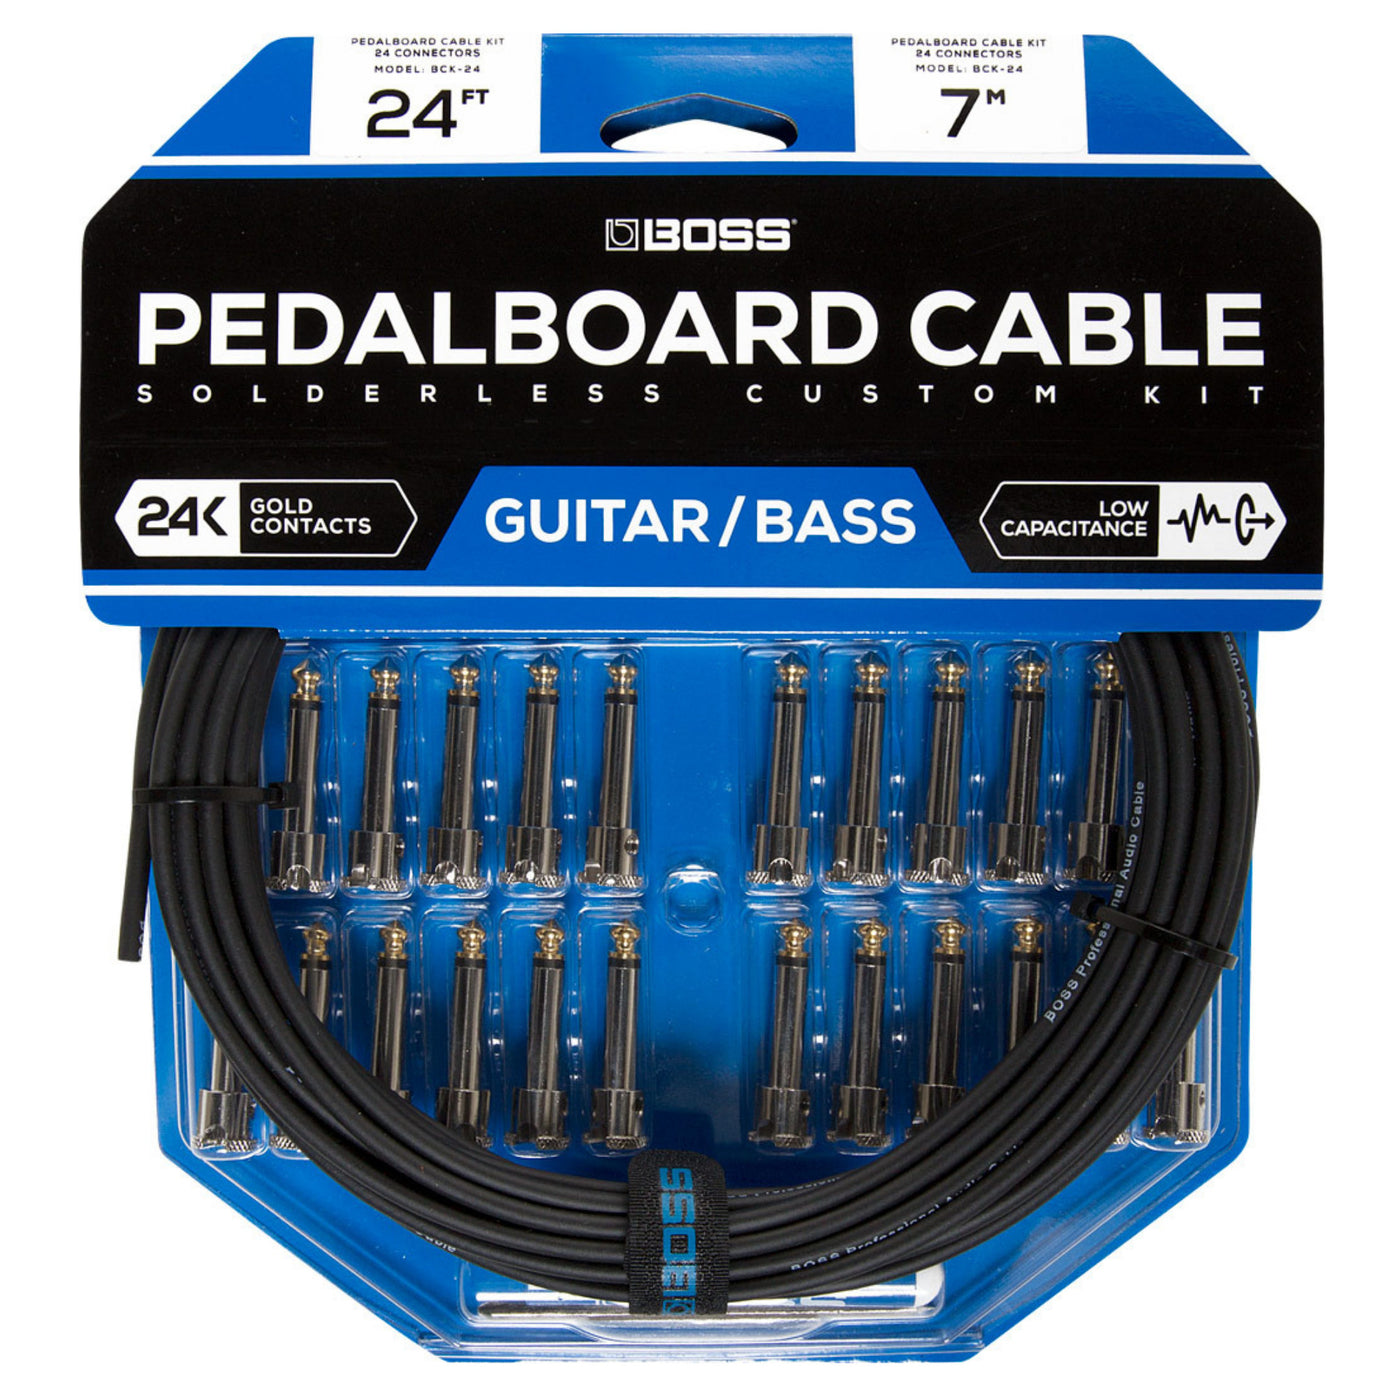 Boss BCK-24 Pedal Board Cable Kit - 24', 24 Connectors